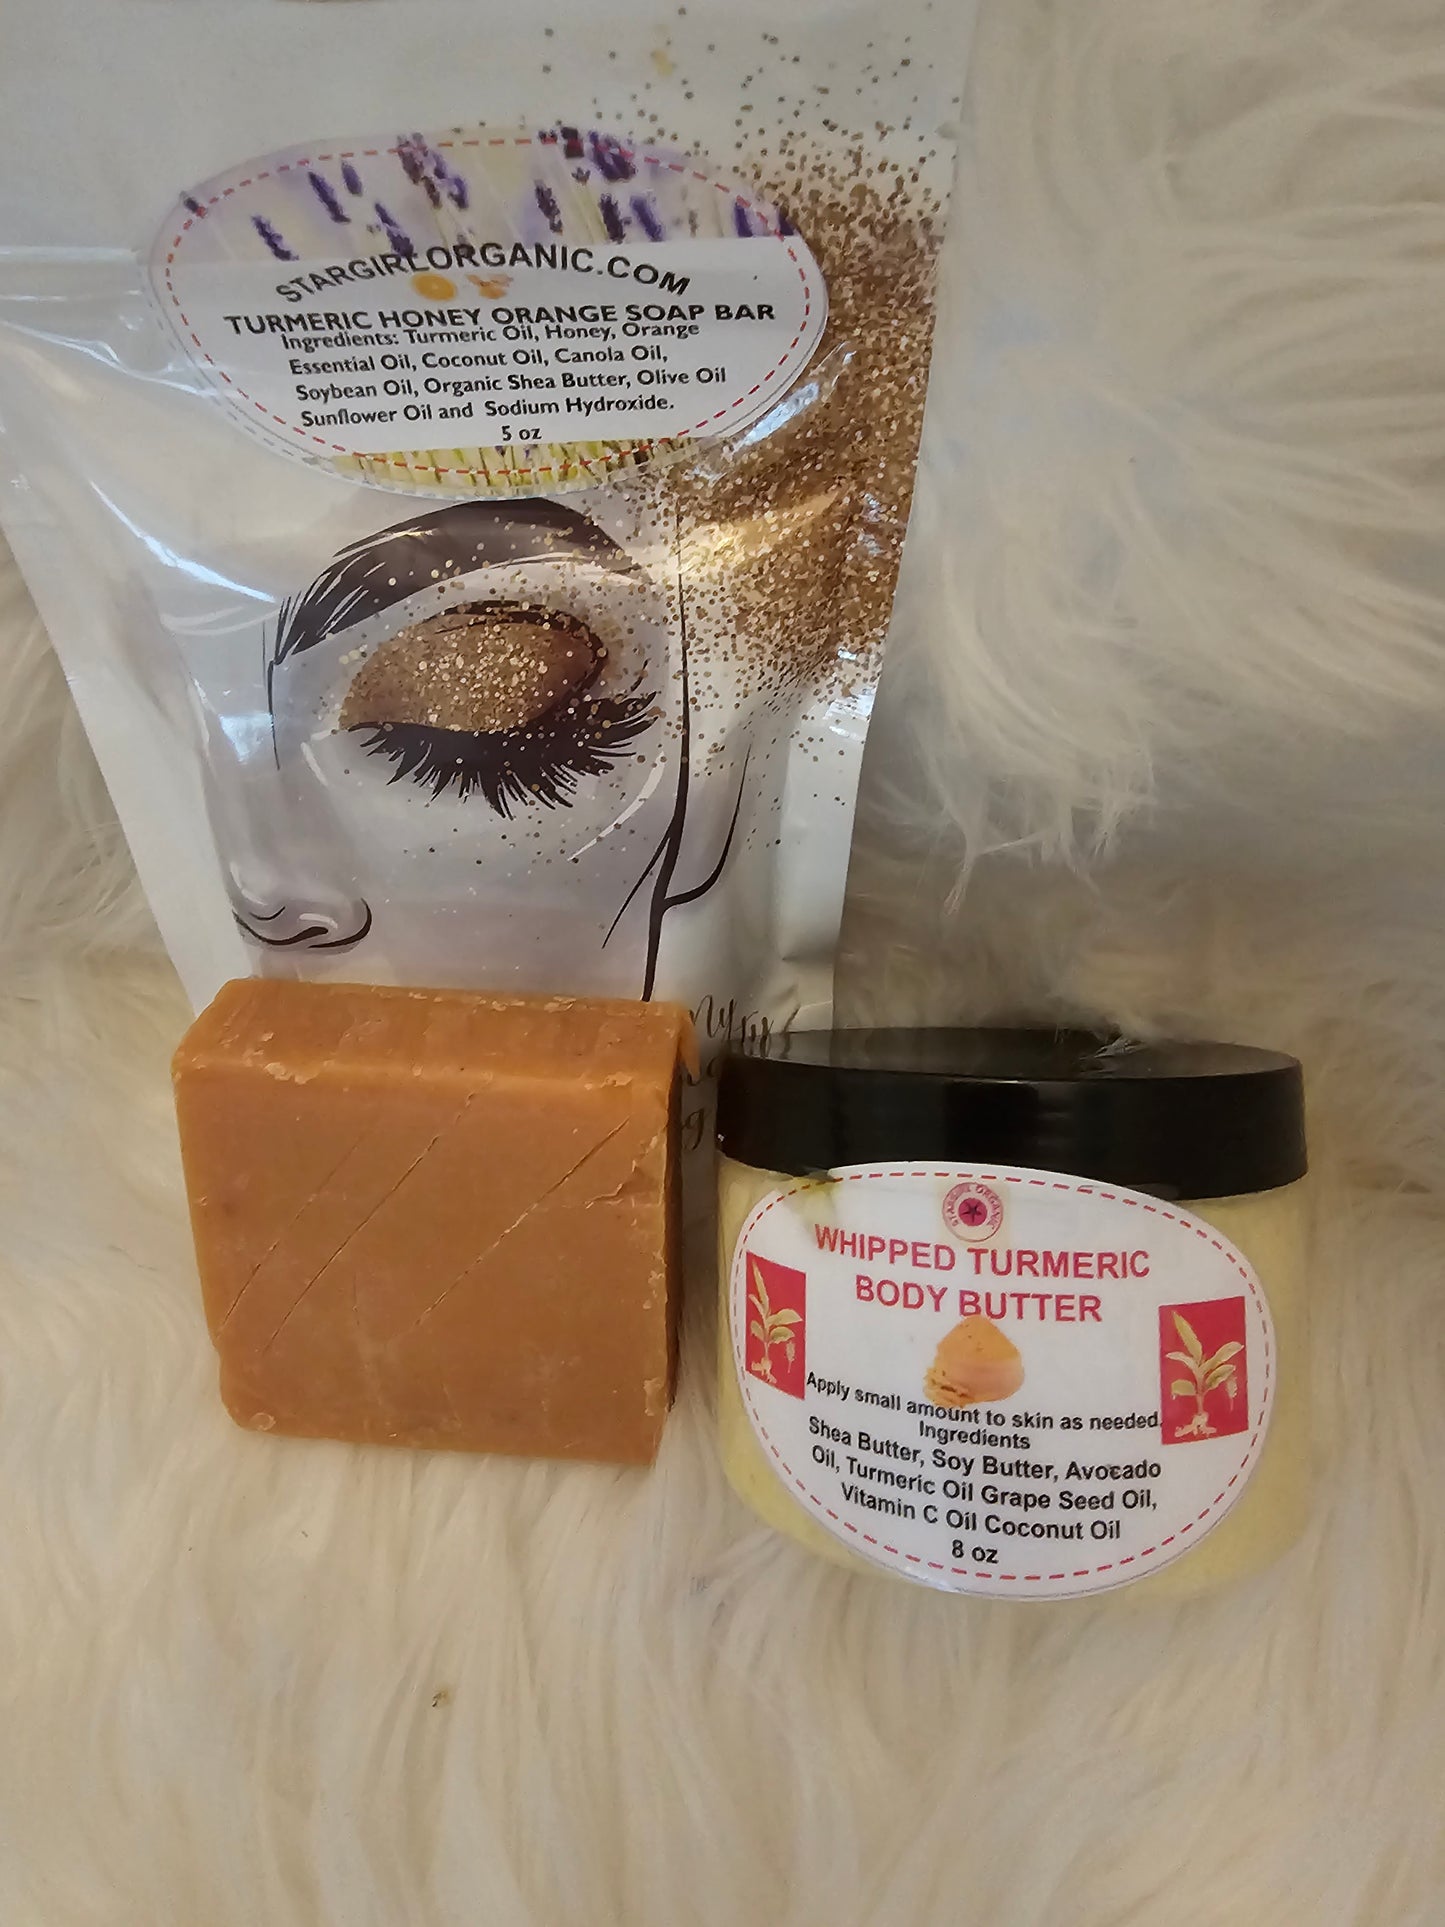 2pc Set Turmeric Honey and Orange Soap Bar and Turmeric Whipped Body Butter